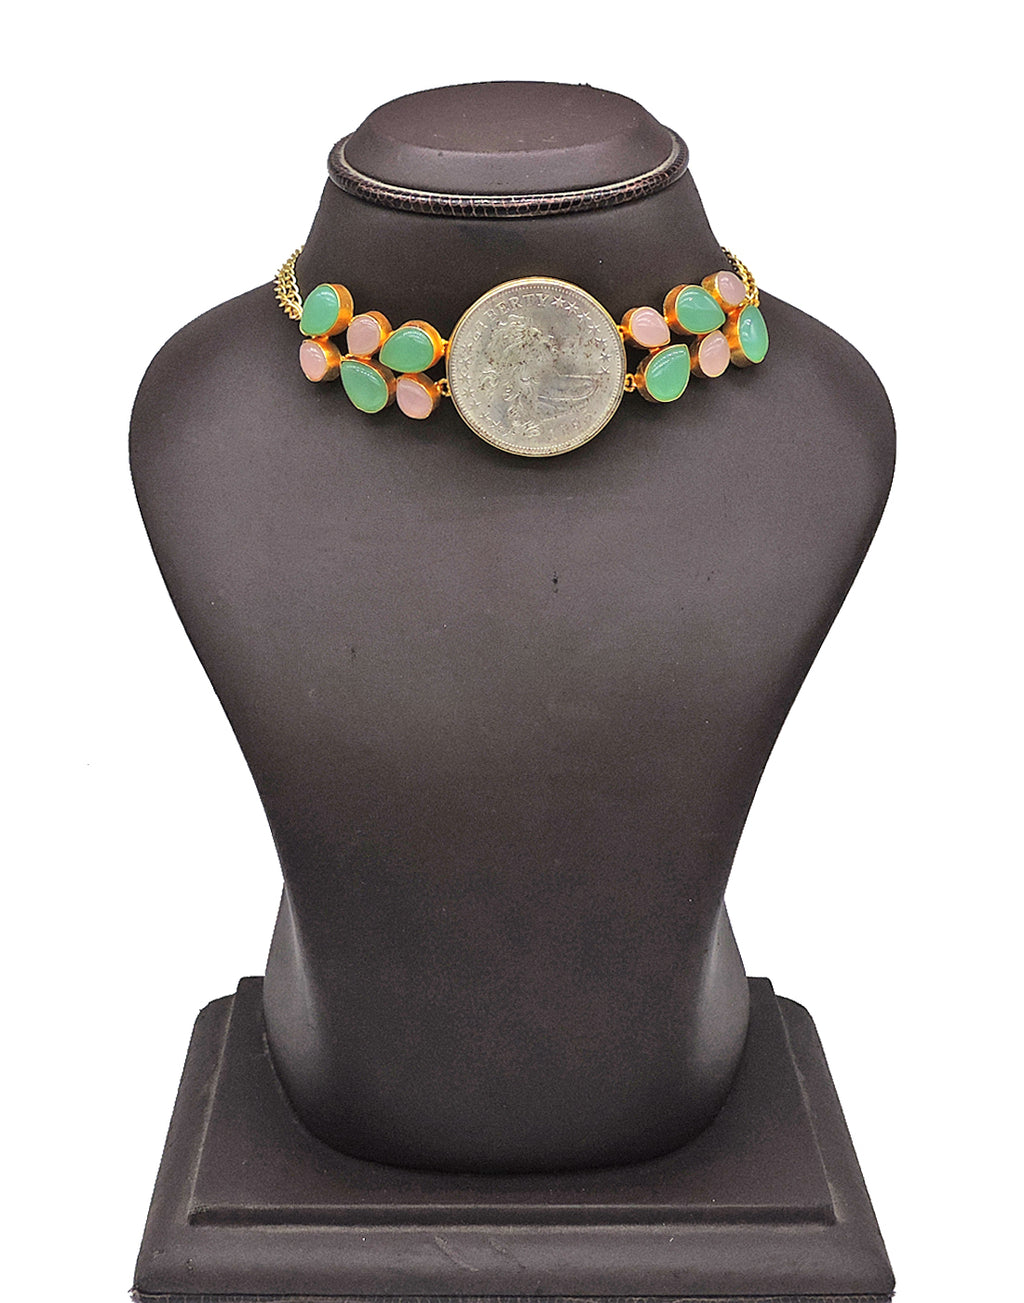 Coin & Monalisa Necklace - Statement Necklaces - Gold-Plated & Hypoallergenic Jewellery - Made in India - Dubai Jewellery - Dori